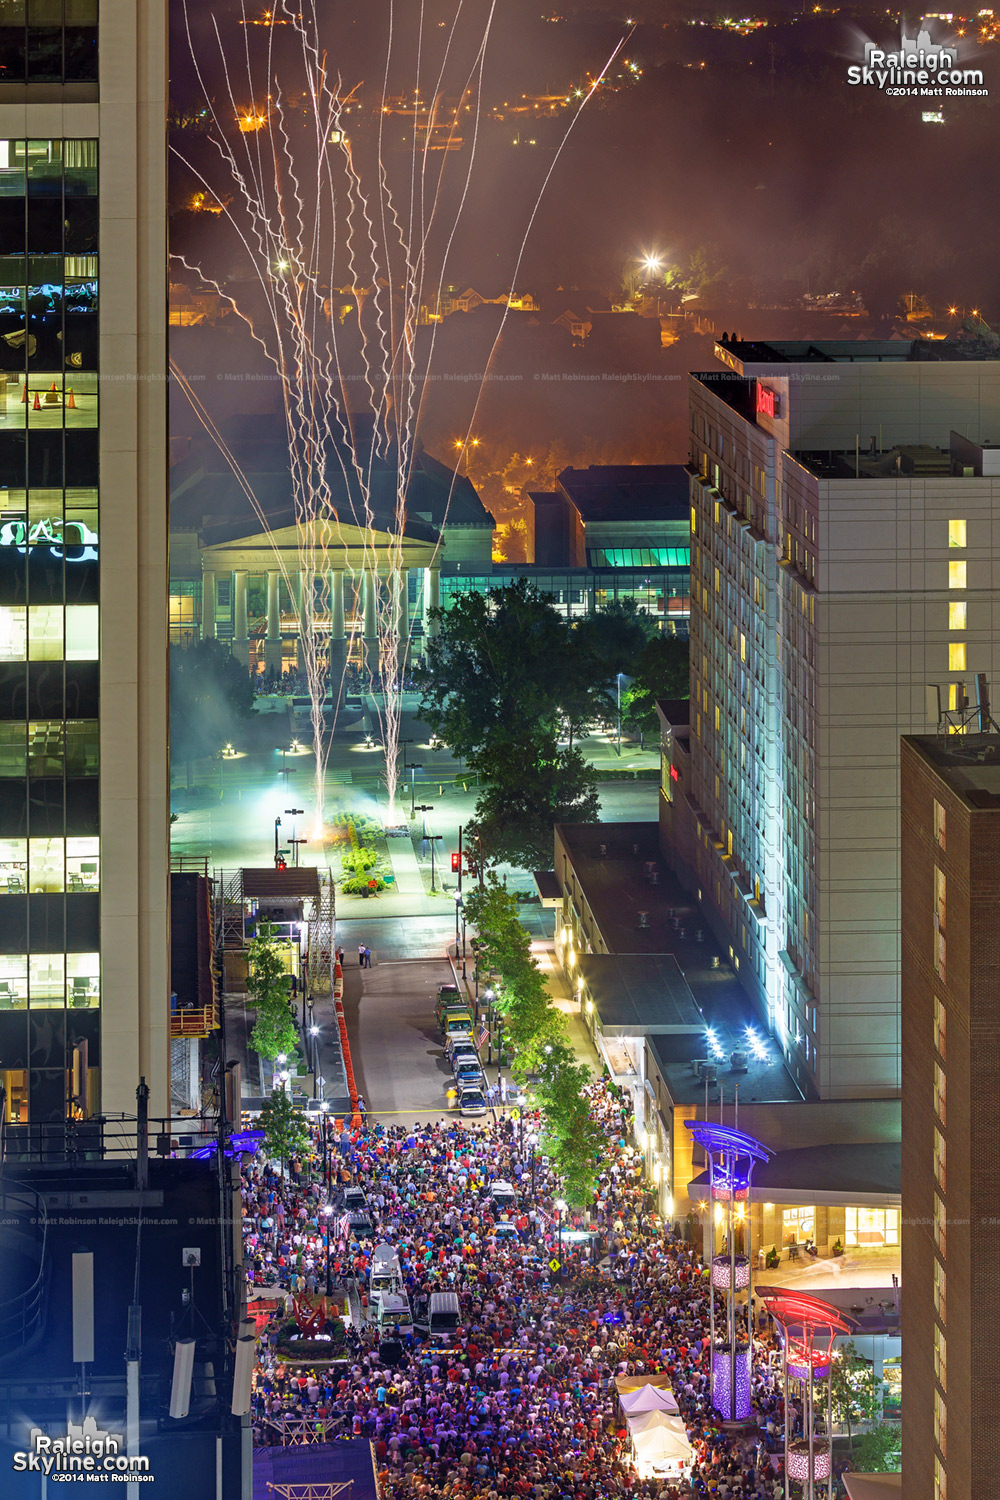 City watching on July 4th and Fireworks in Raleigh